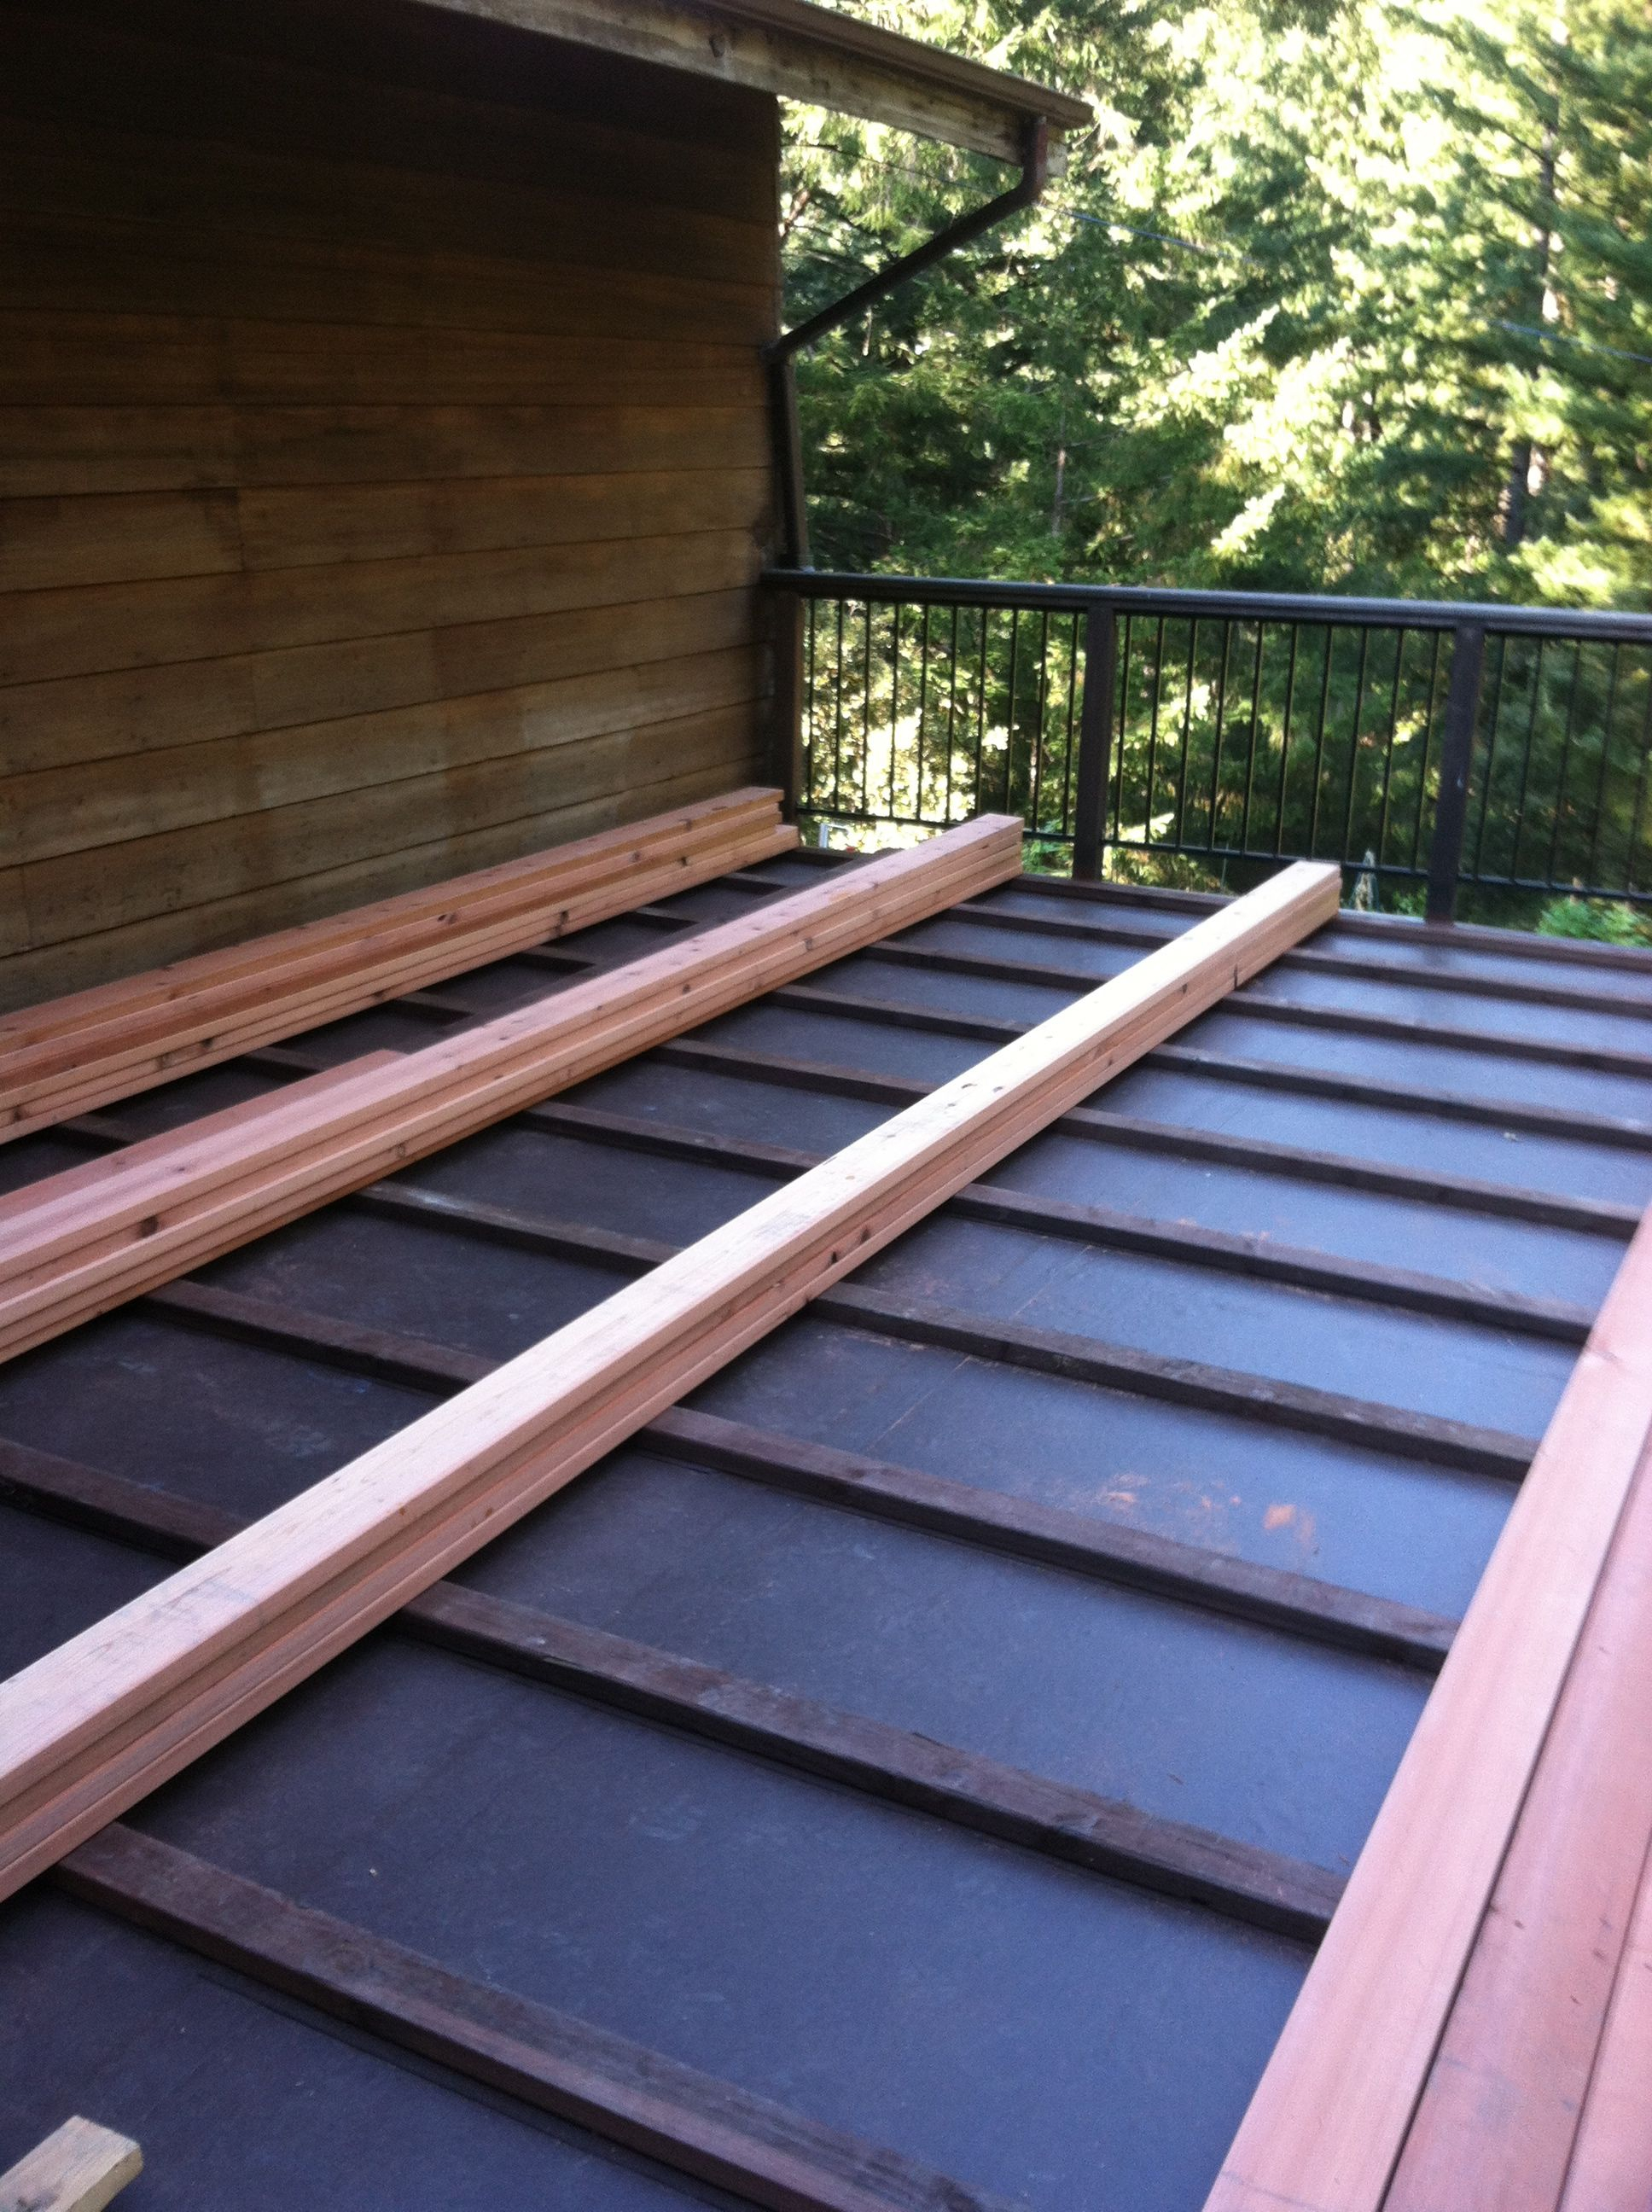 Ib Waterproof Membrane With 2x4 Pt Sleepers And 2x6 Redwood Ch throughout dimensions 1936 X 2592